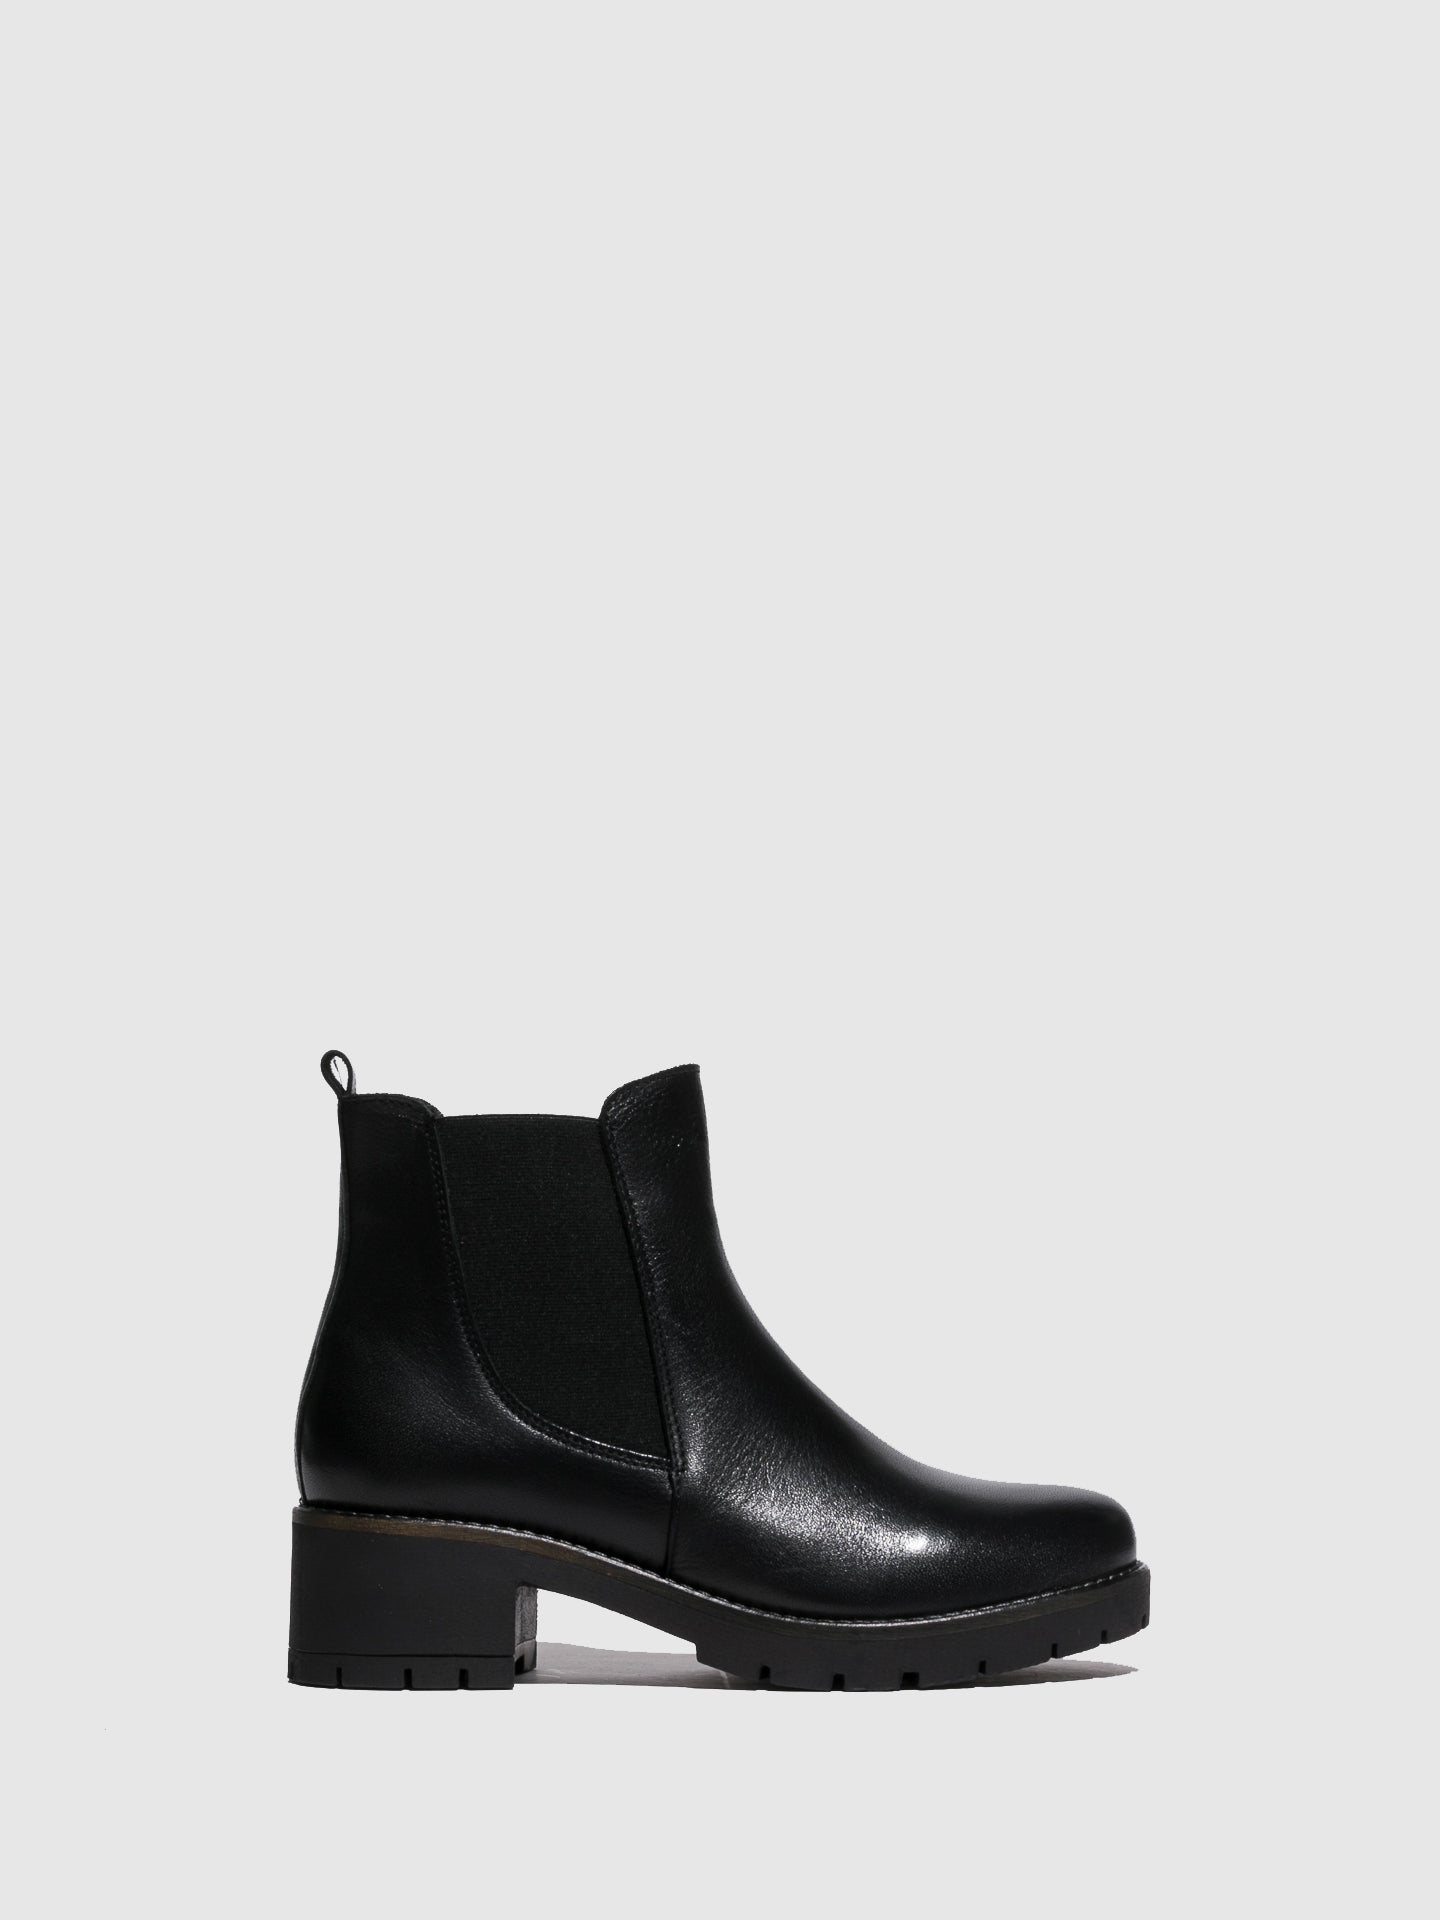 Foreva Black Leather Chelsea Ankle Boots